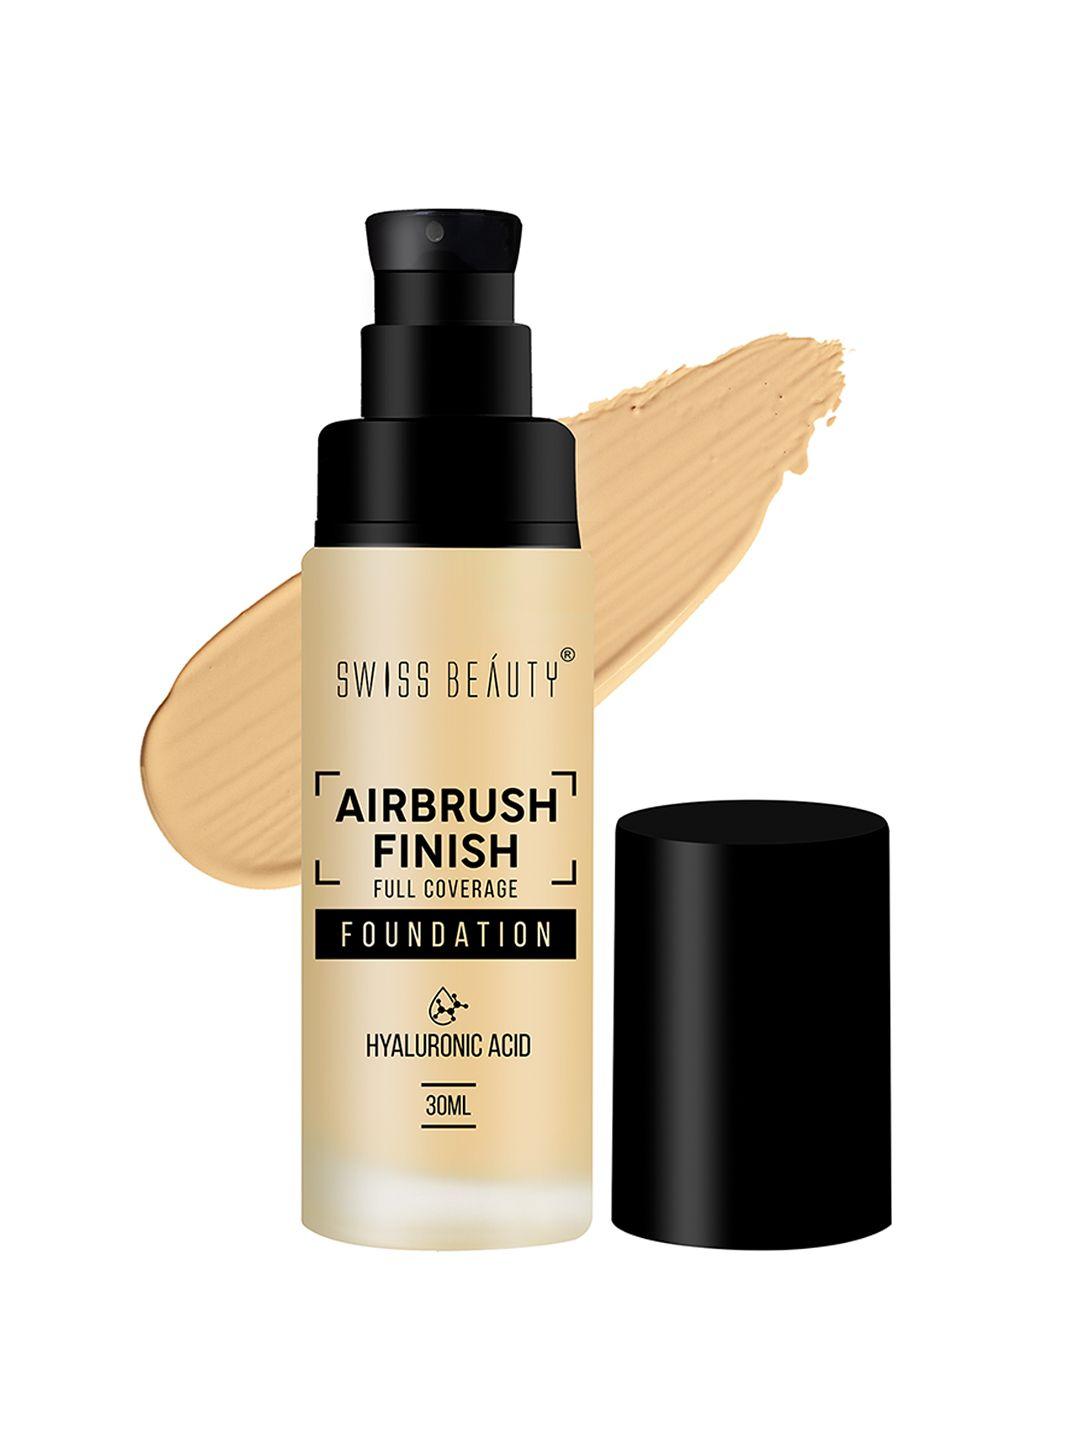 swiss beauty airbrush finish full coverage foundation with hyaluronic acid 30ml-fair ivory